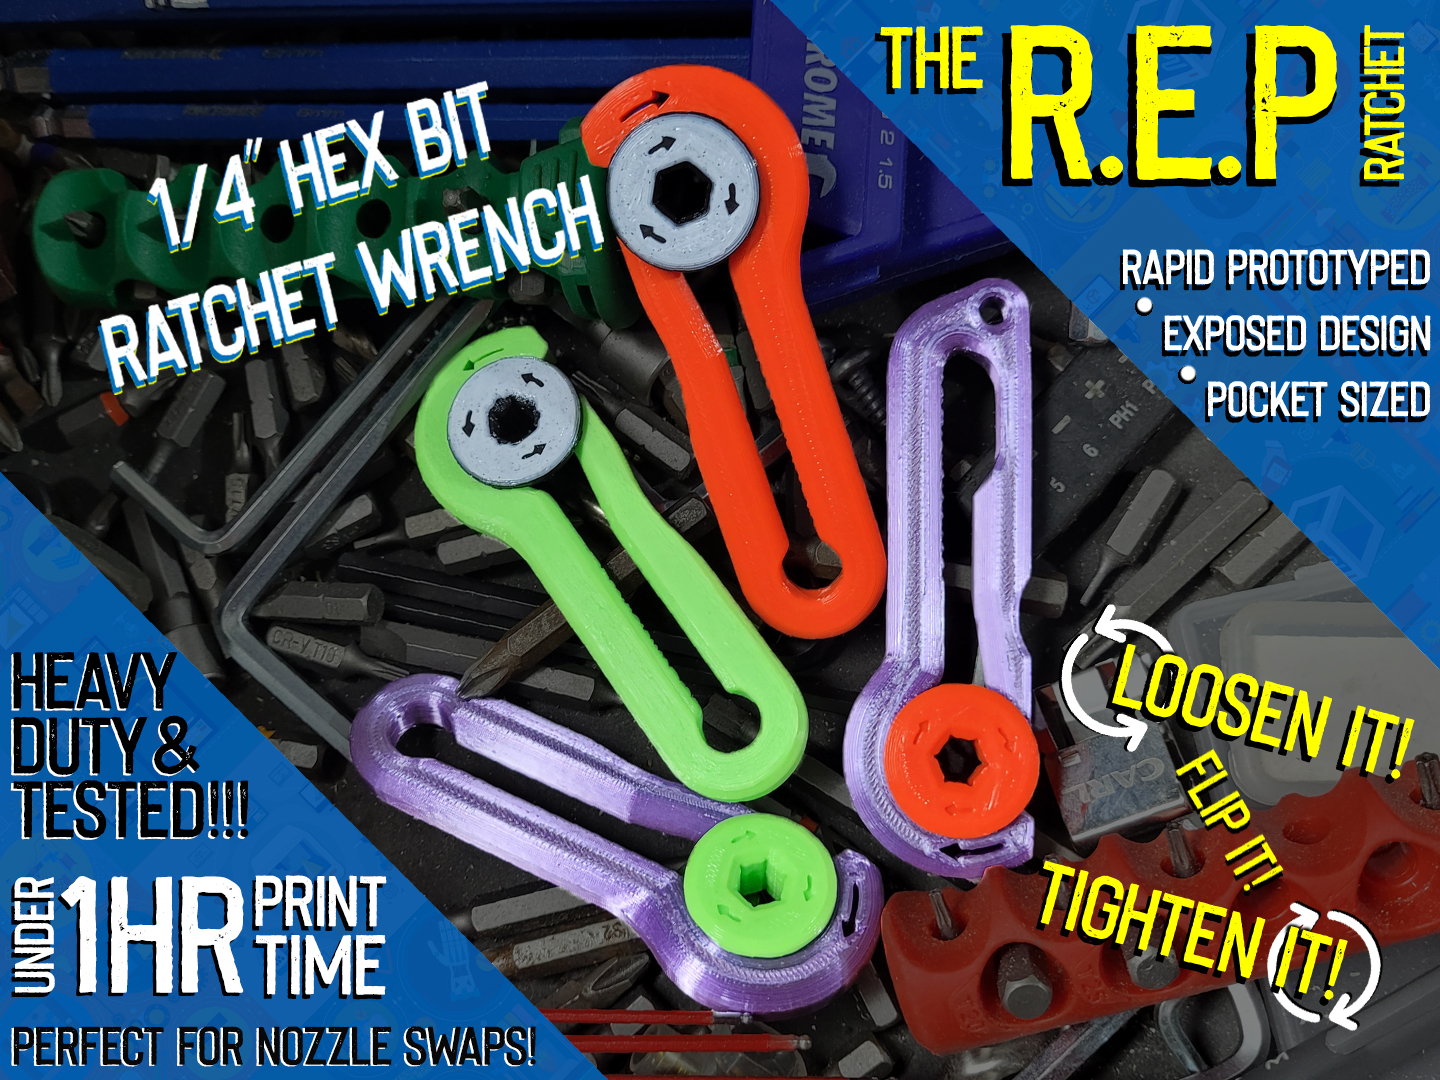 1/4" Hex Bit Ratchet Wrench Tool and FIDGET TOY!!!